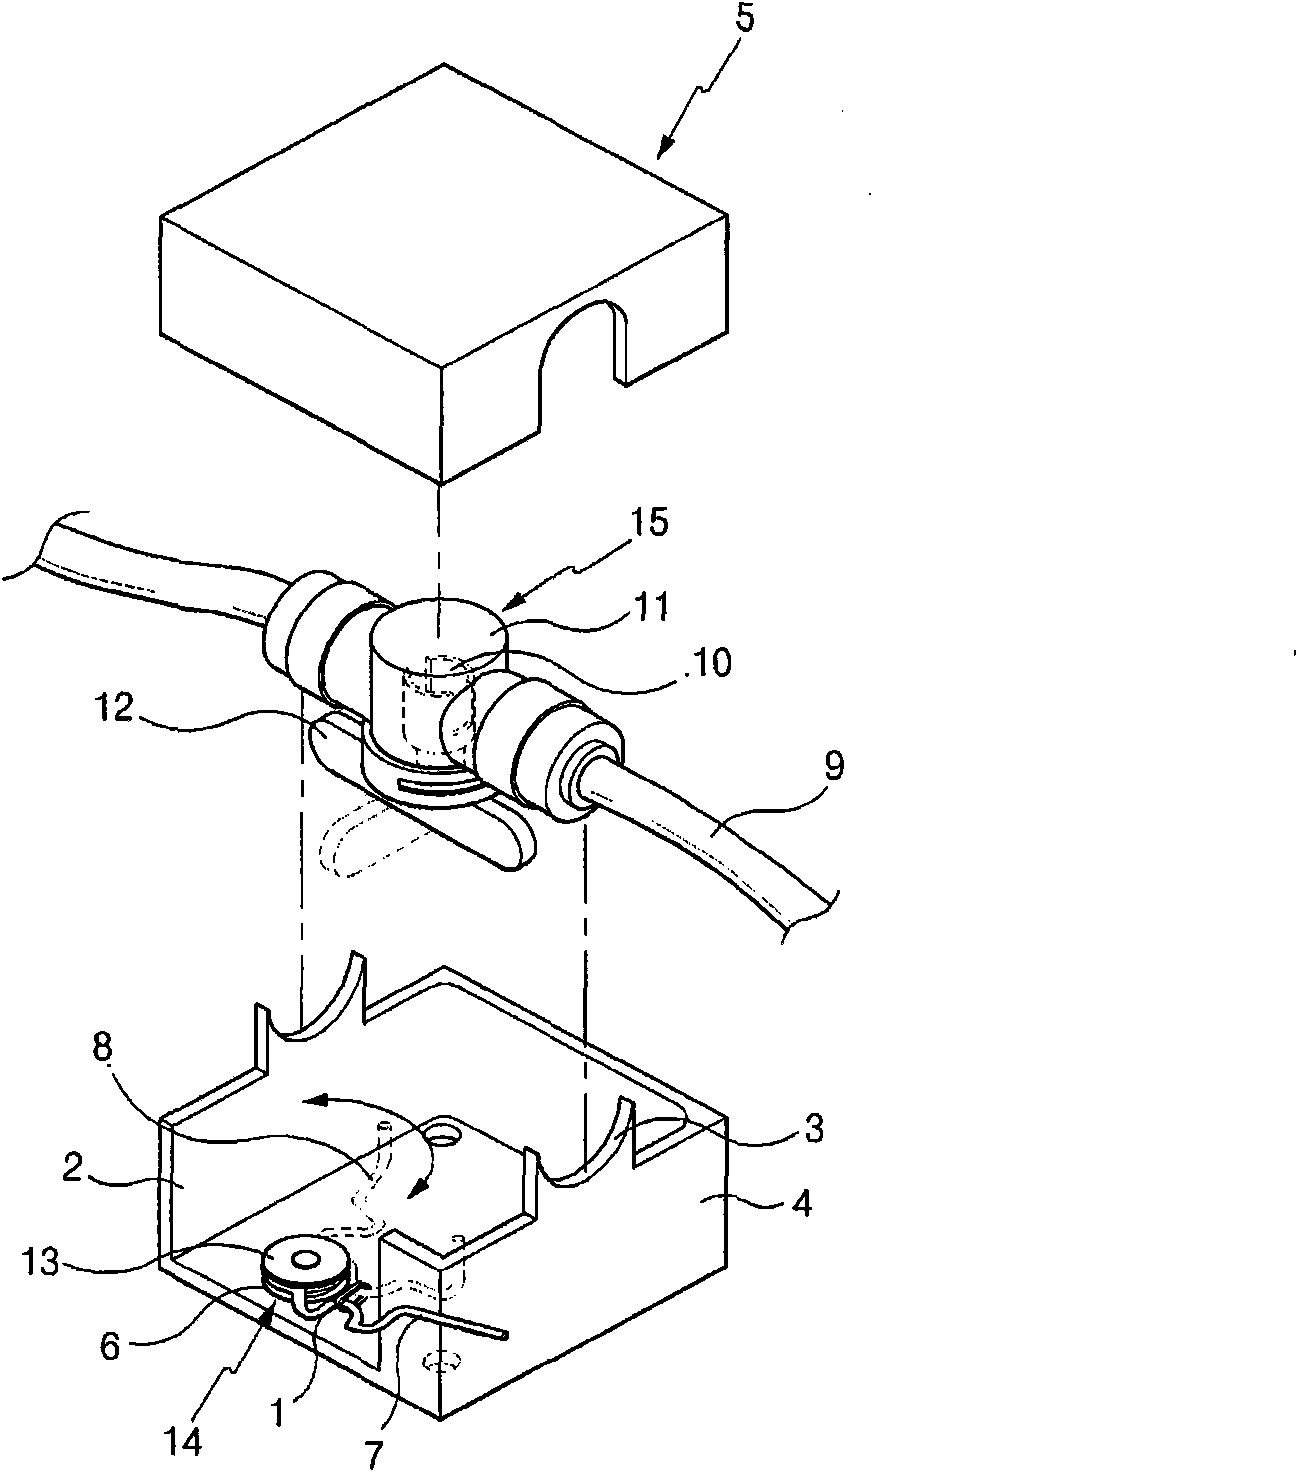 Device for preventing leakage from water purifier